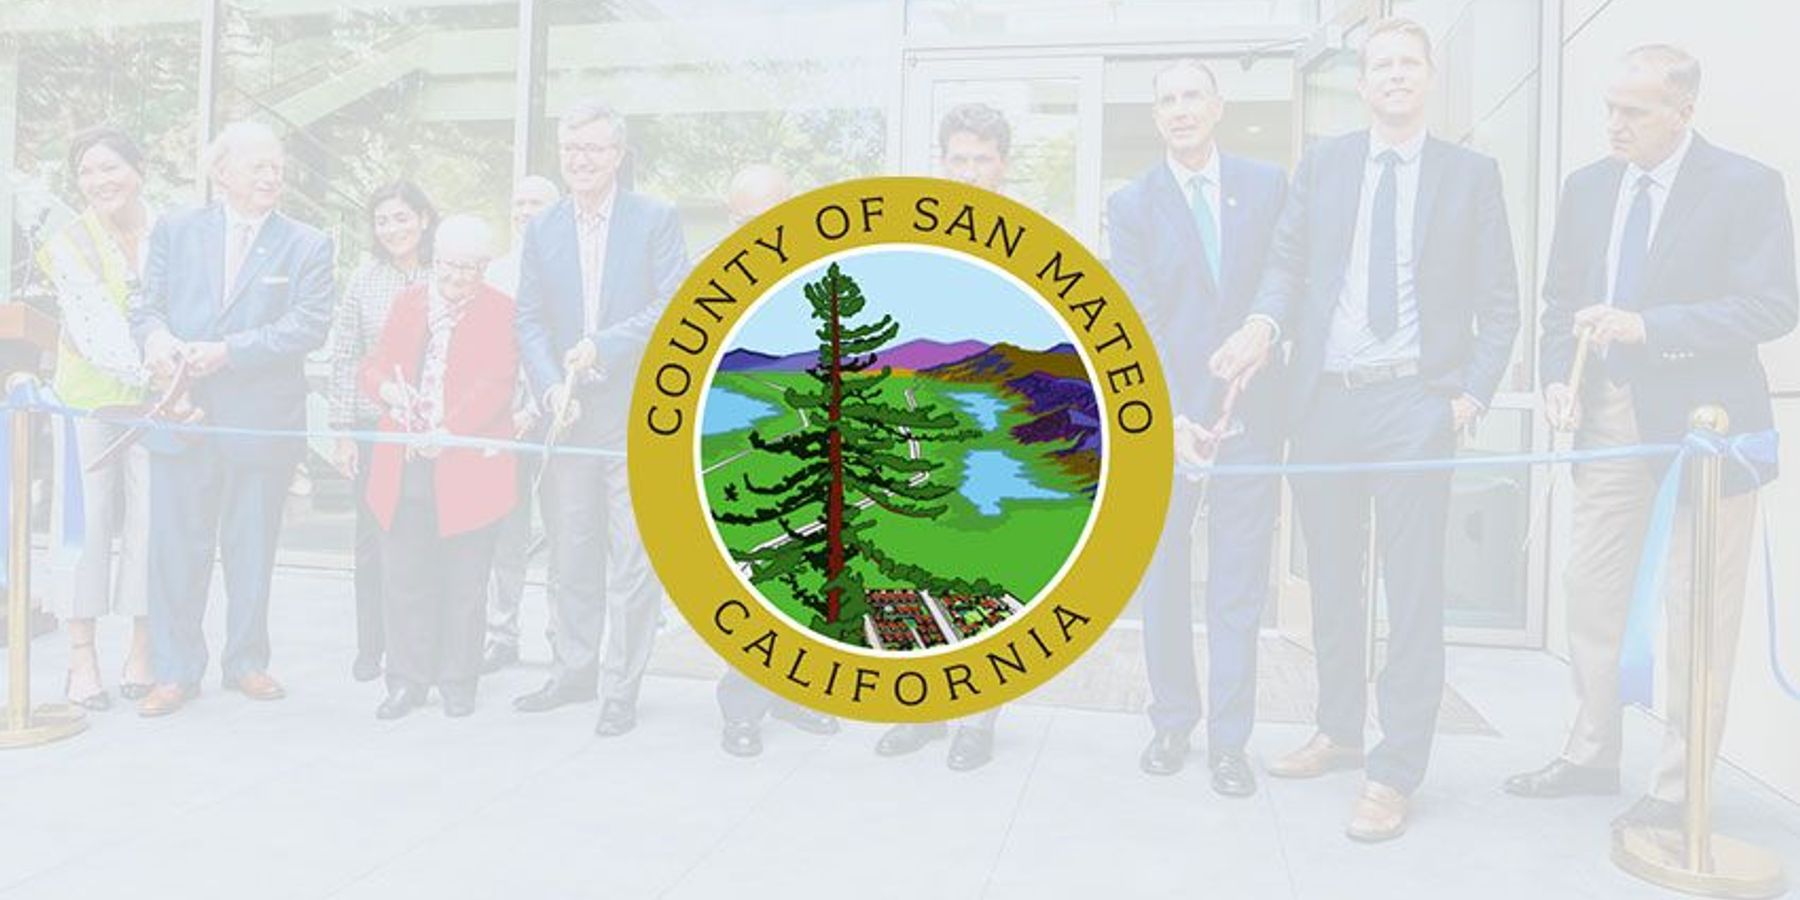 County of San Mateo: Content Anytime accelerates employee growth in both traditional and virtual work environments